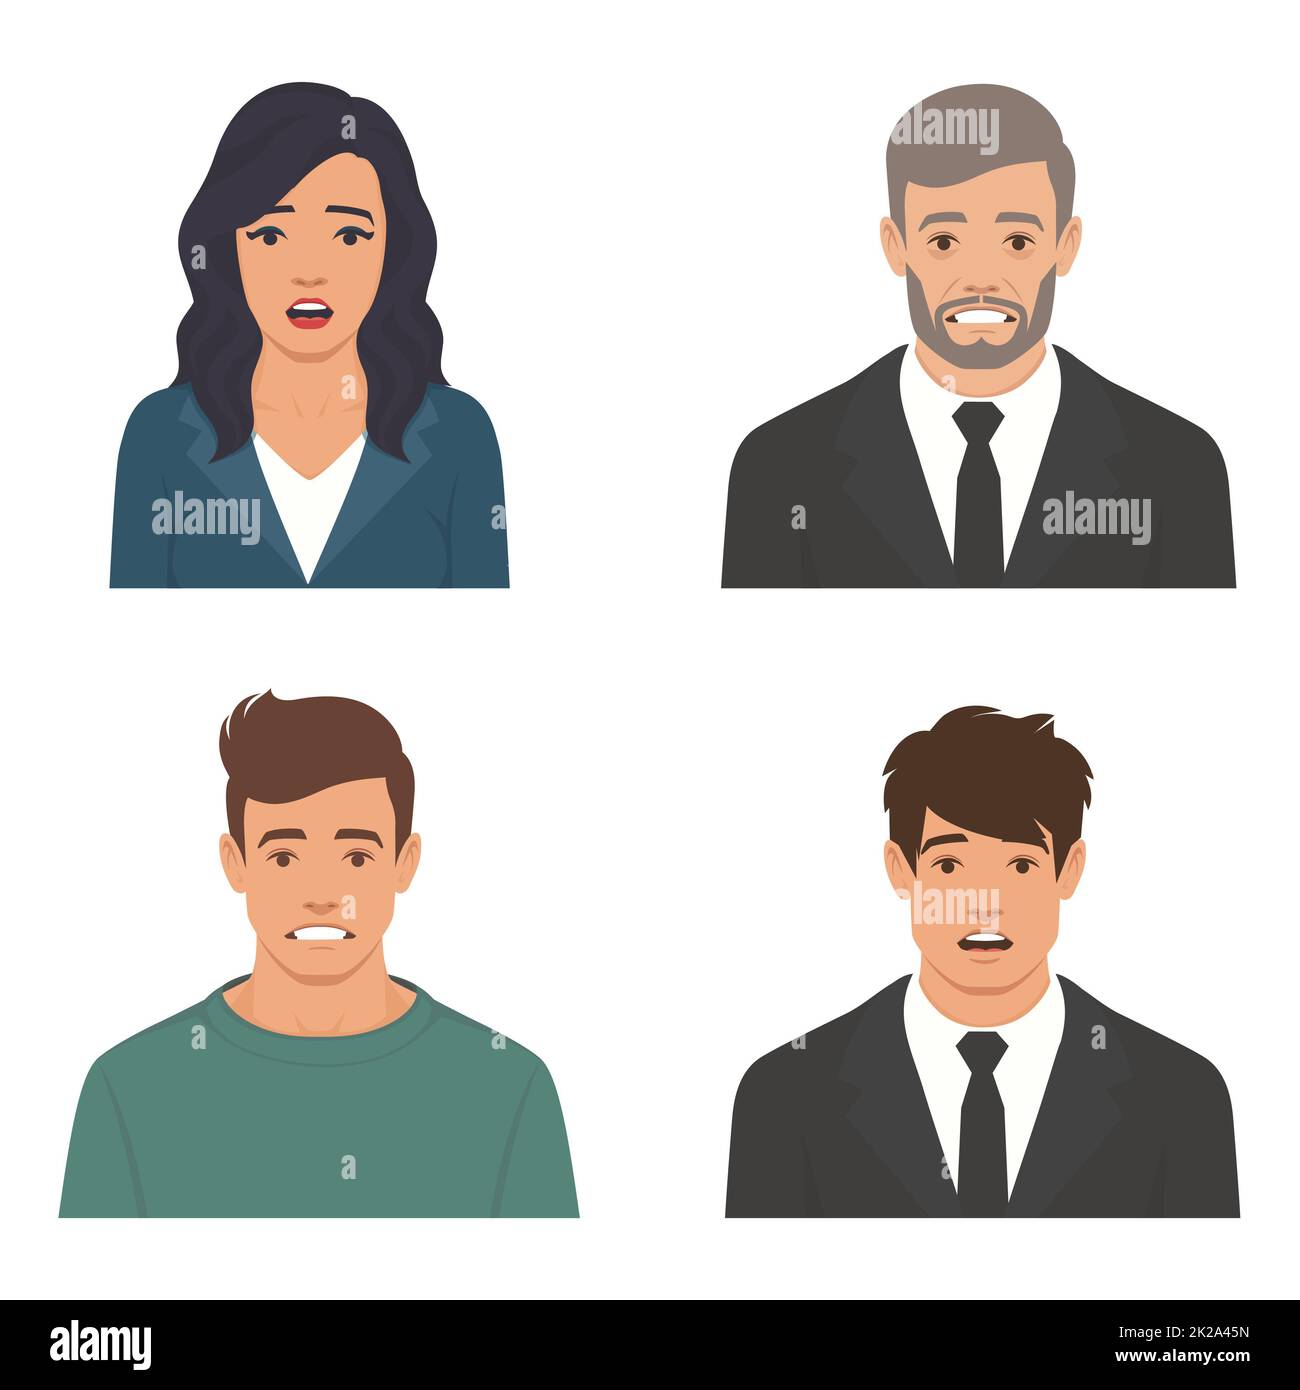 Flat vector illustration, portraits of shocked scared people faces, human emotion Stock Photo